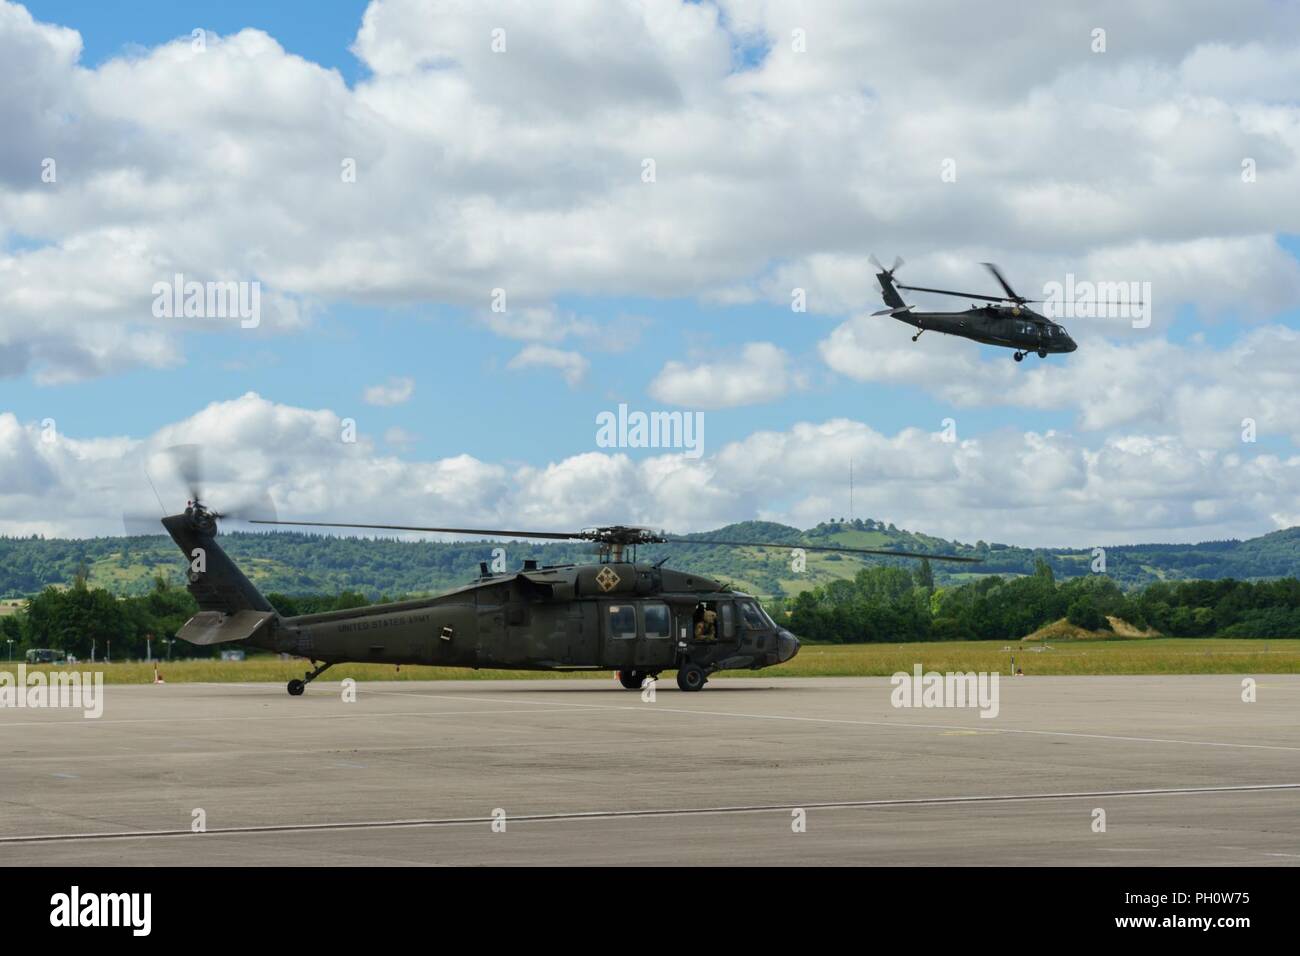 U.S. Army UH-60 Blackhawk helicopter flight crews with the 4th Combat Aviation Brigade, 4th Infantry Division, out of Fort Carson, Colorado, land at the Illesheim Army Airfield in Germany, June 22, 2018. Soldiers of the brigade arrived in Germany to begin a nine-month deployment in support of Atlantic Resolve, a U.S. endeavor to fulfill NATO commitments by rotating U.S.-based units throughout the European theater to deter aggression against NATO allies and partners in Europe. Stock Photo